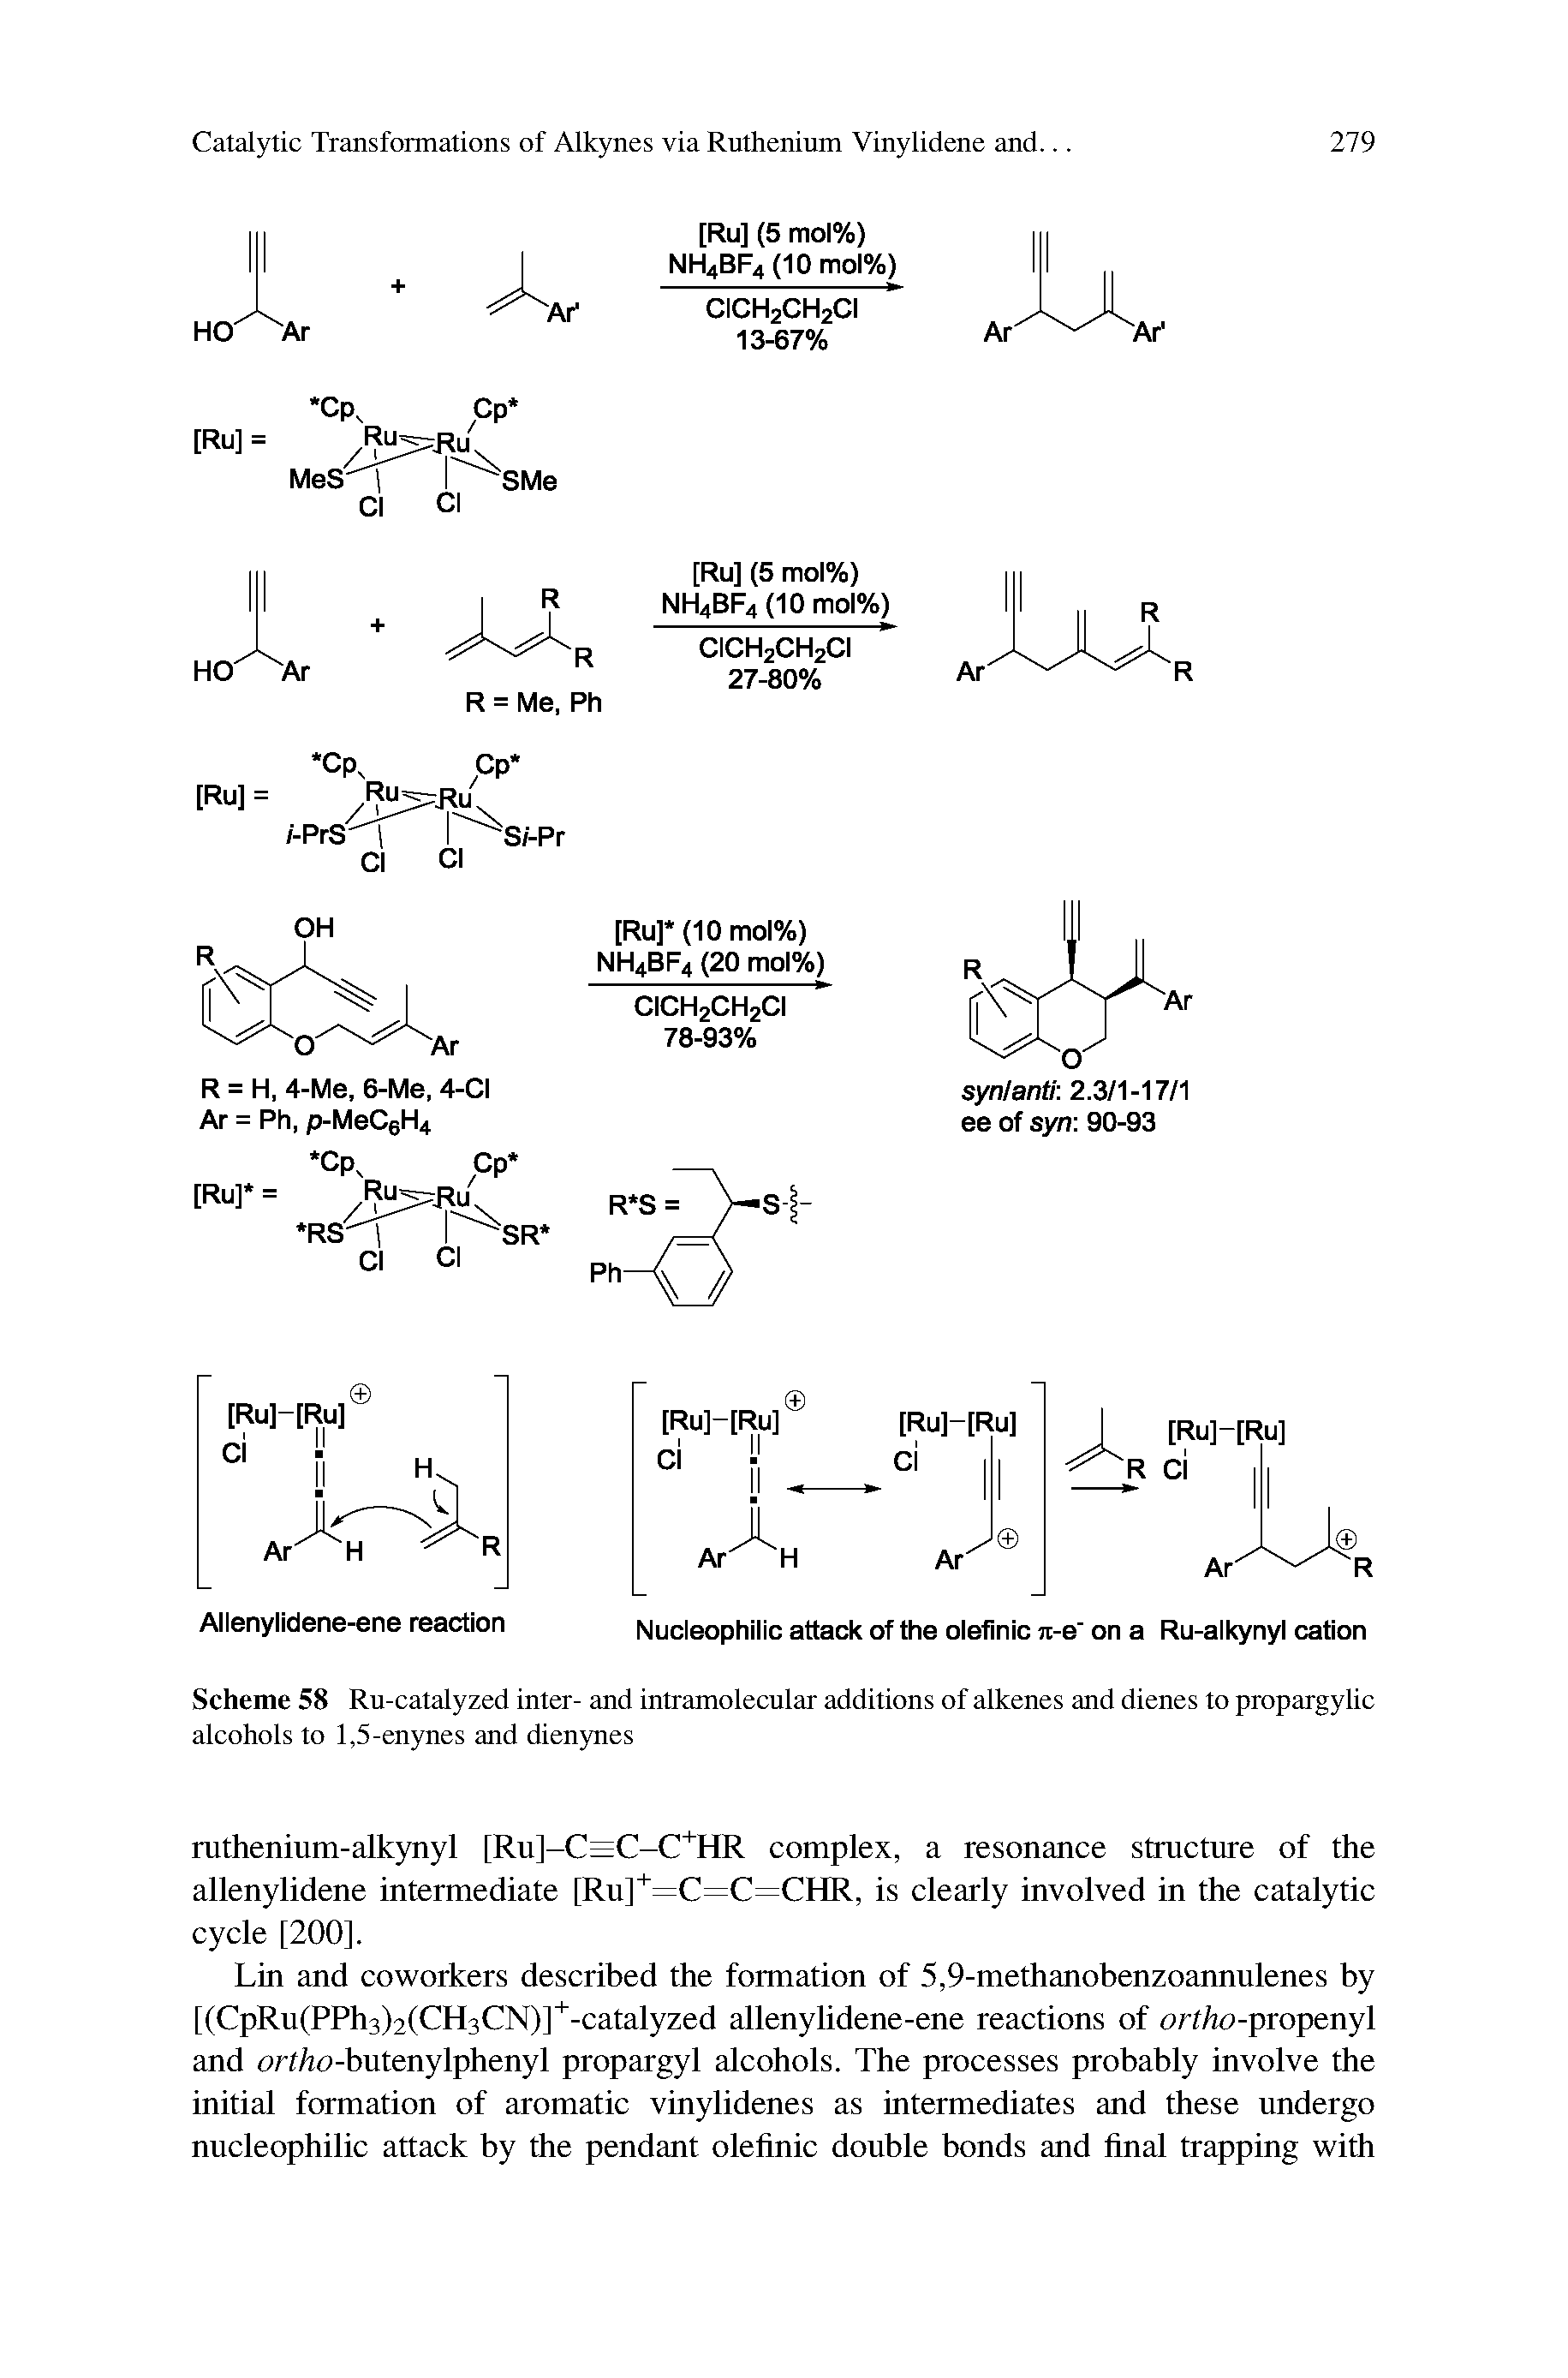 Scheme 58 Ru-catalyzed inter- and intramolecular additions of alkenes and dienes to propargylic alcohols to 1,5-enynes and dienynes...